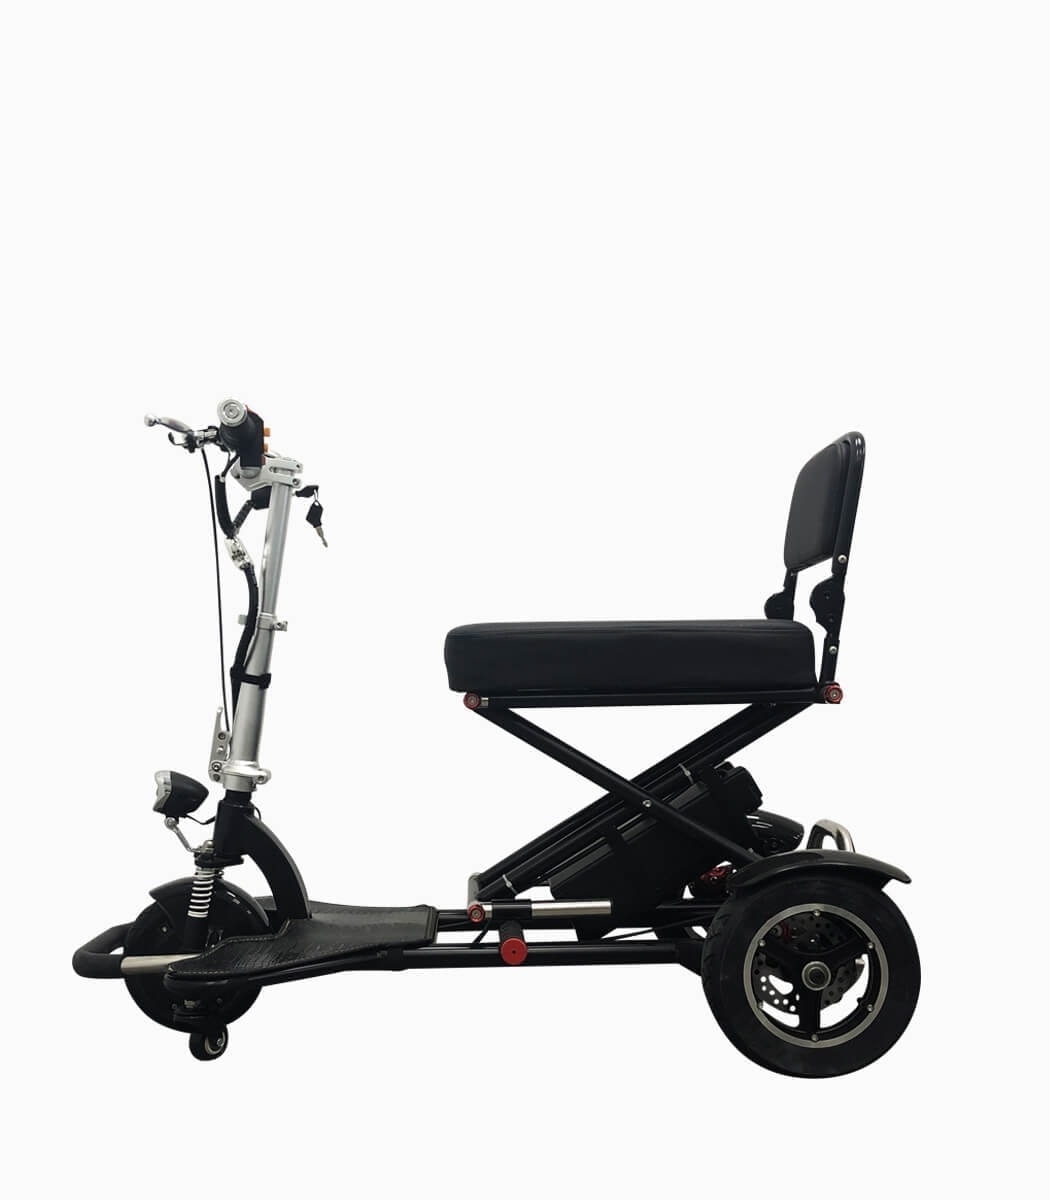 MOBOT FLEXI MAX (BLACK12AH) 3 wheel mobility scooter left